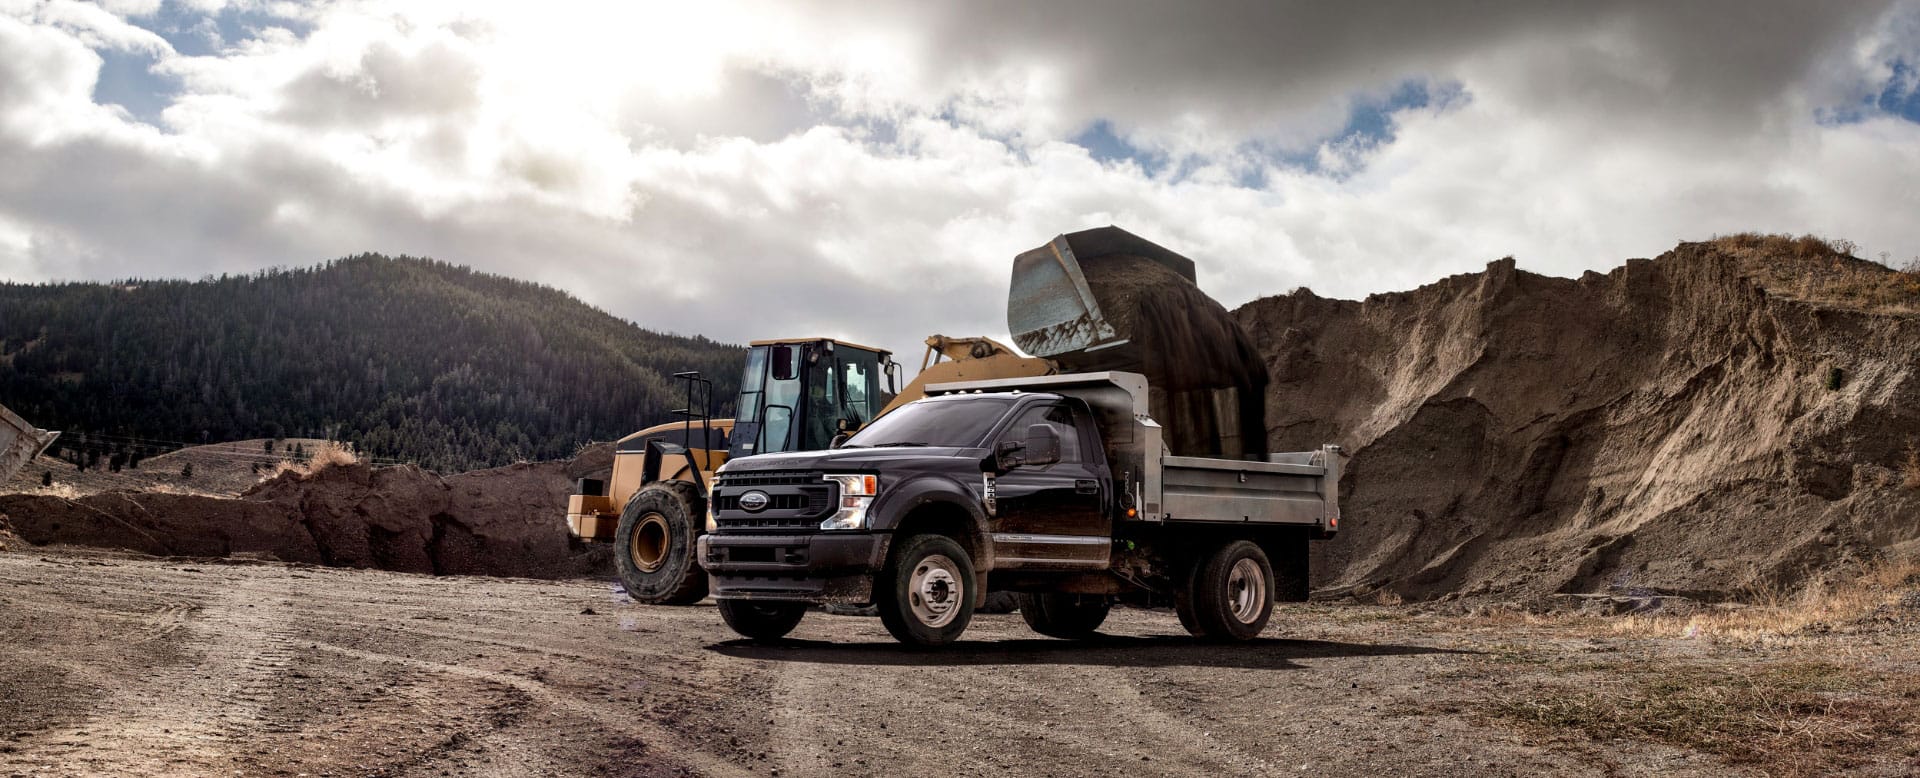 A Ford dump truck being filled with dirt by a shovel construction truck.